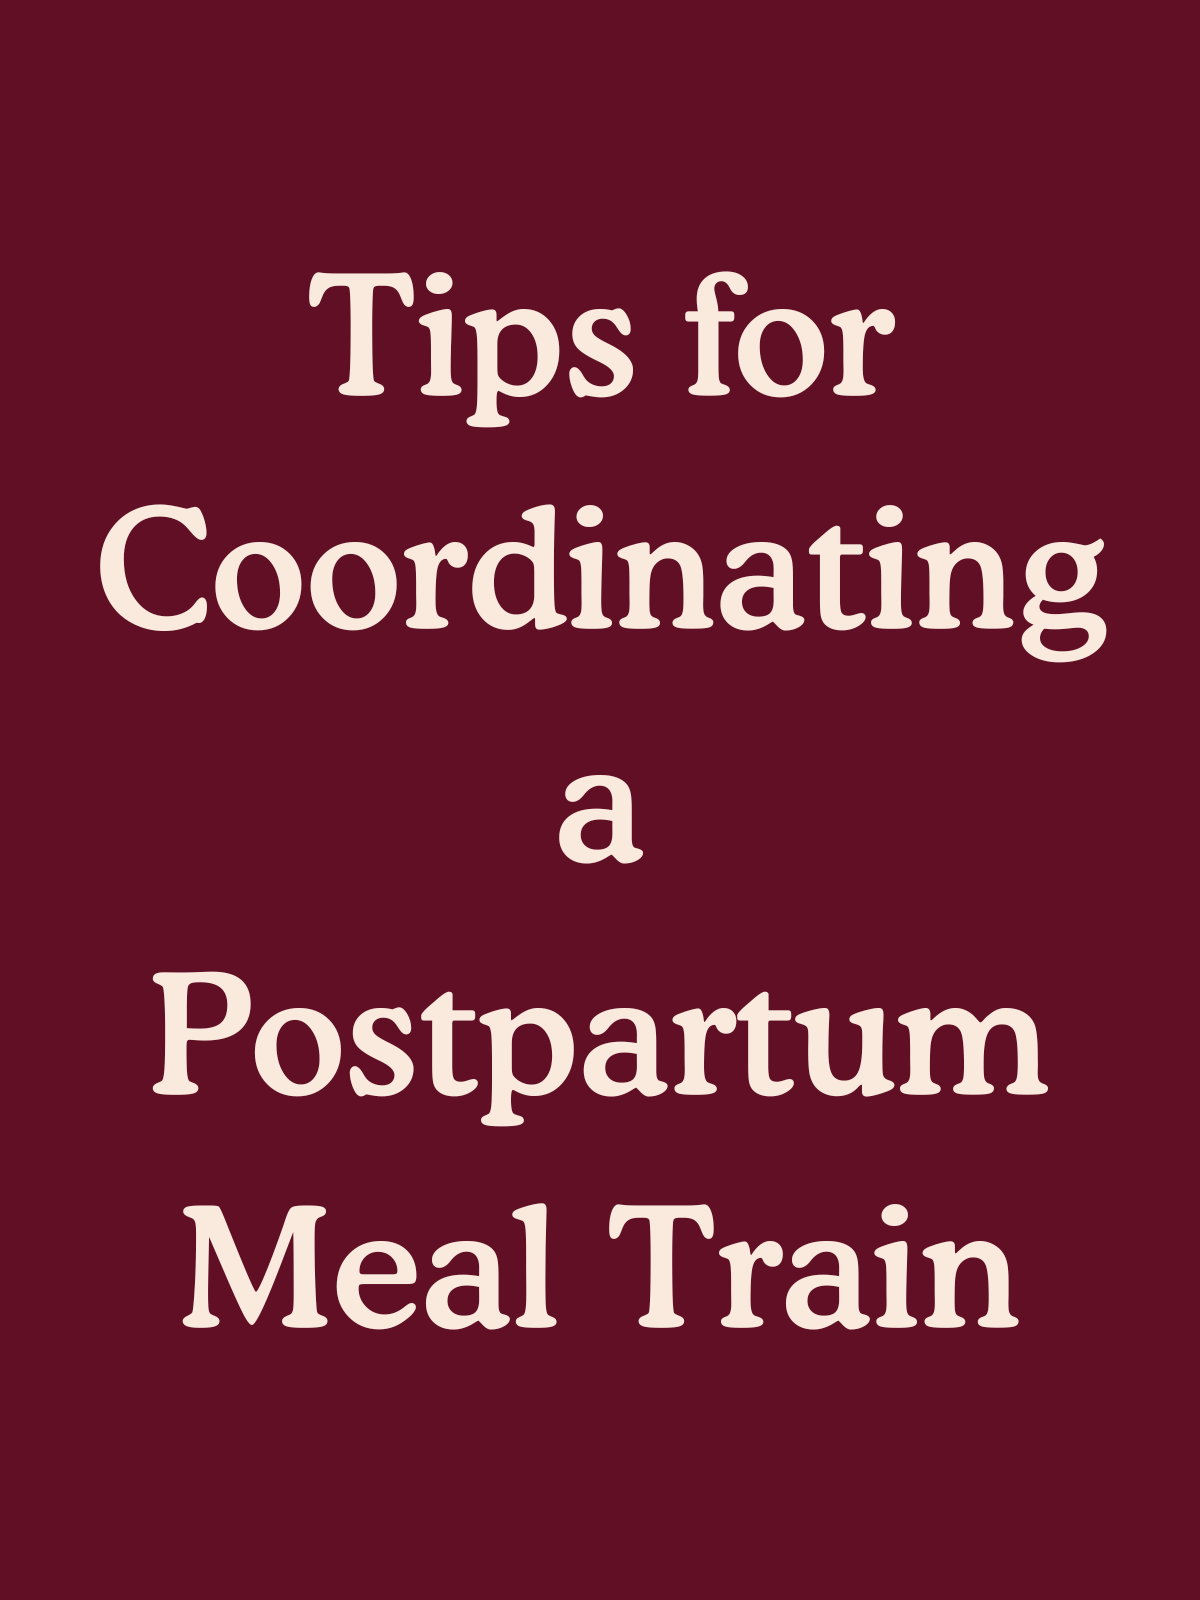 Tips for Coordinating a Postpartum Meal Train